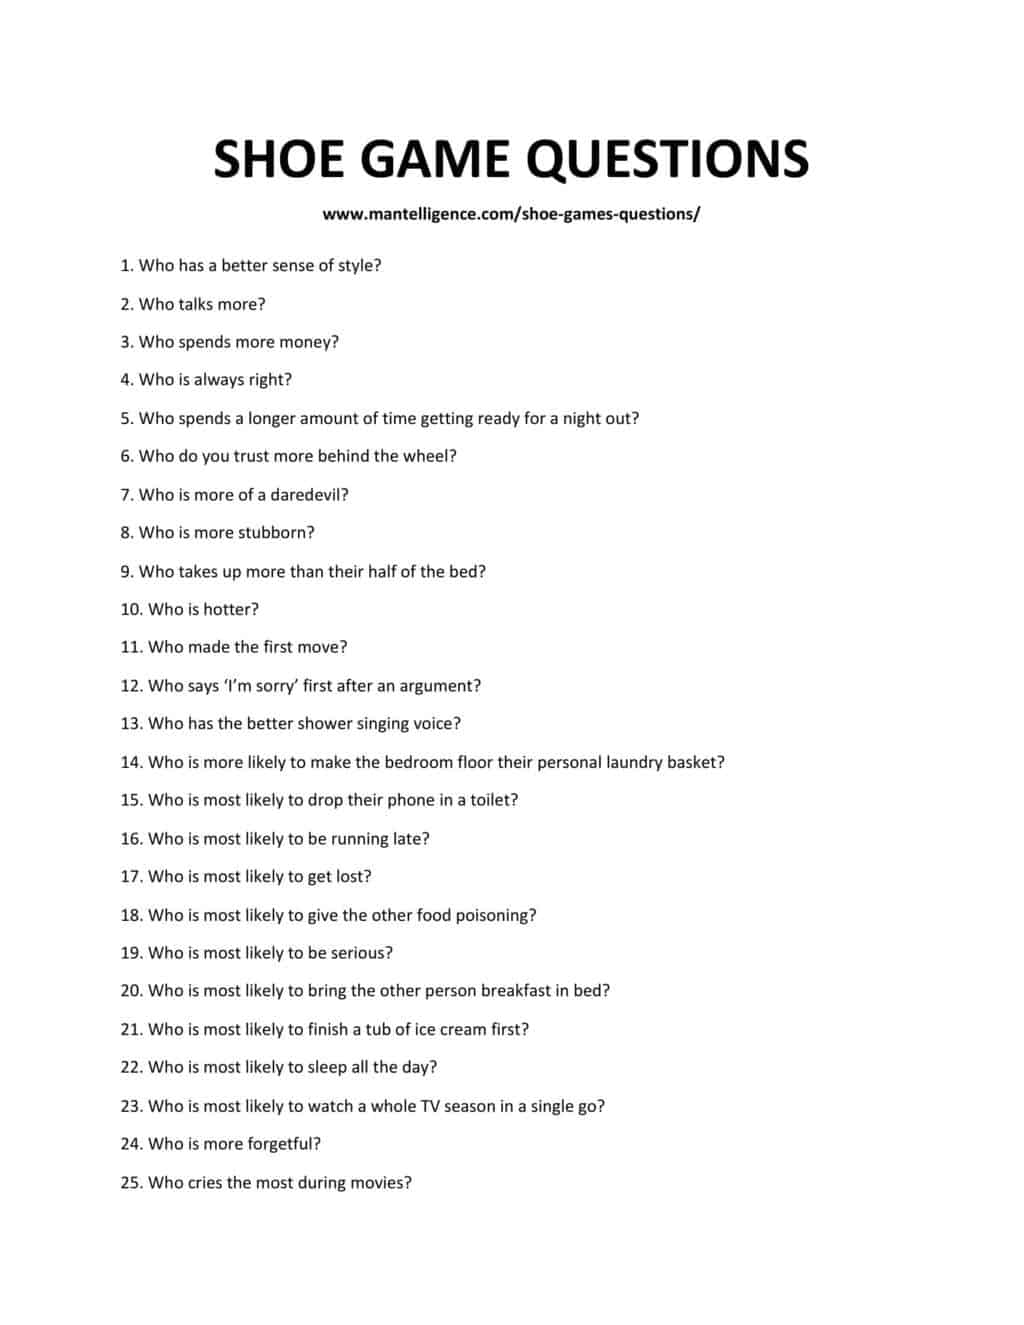 34 Shoe Game Questions - The Only List You Need For A Fun Time!